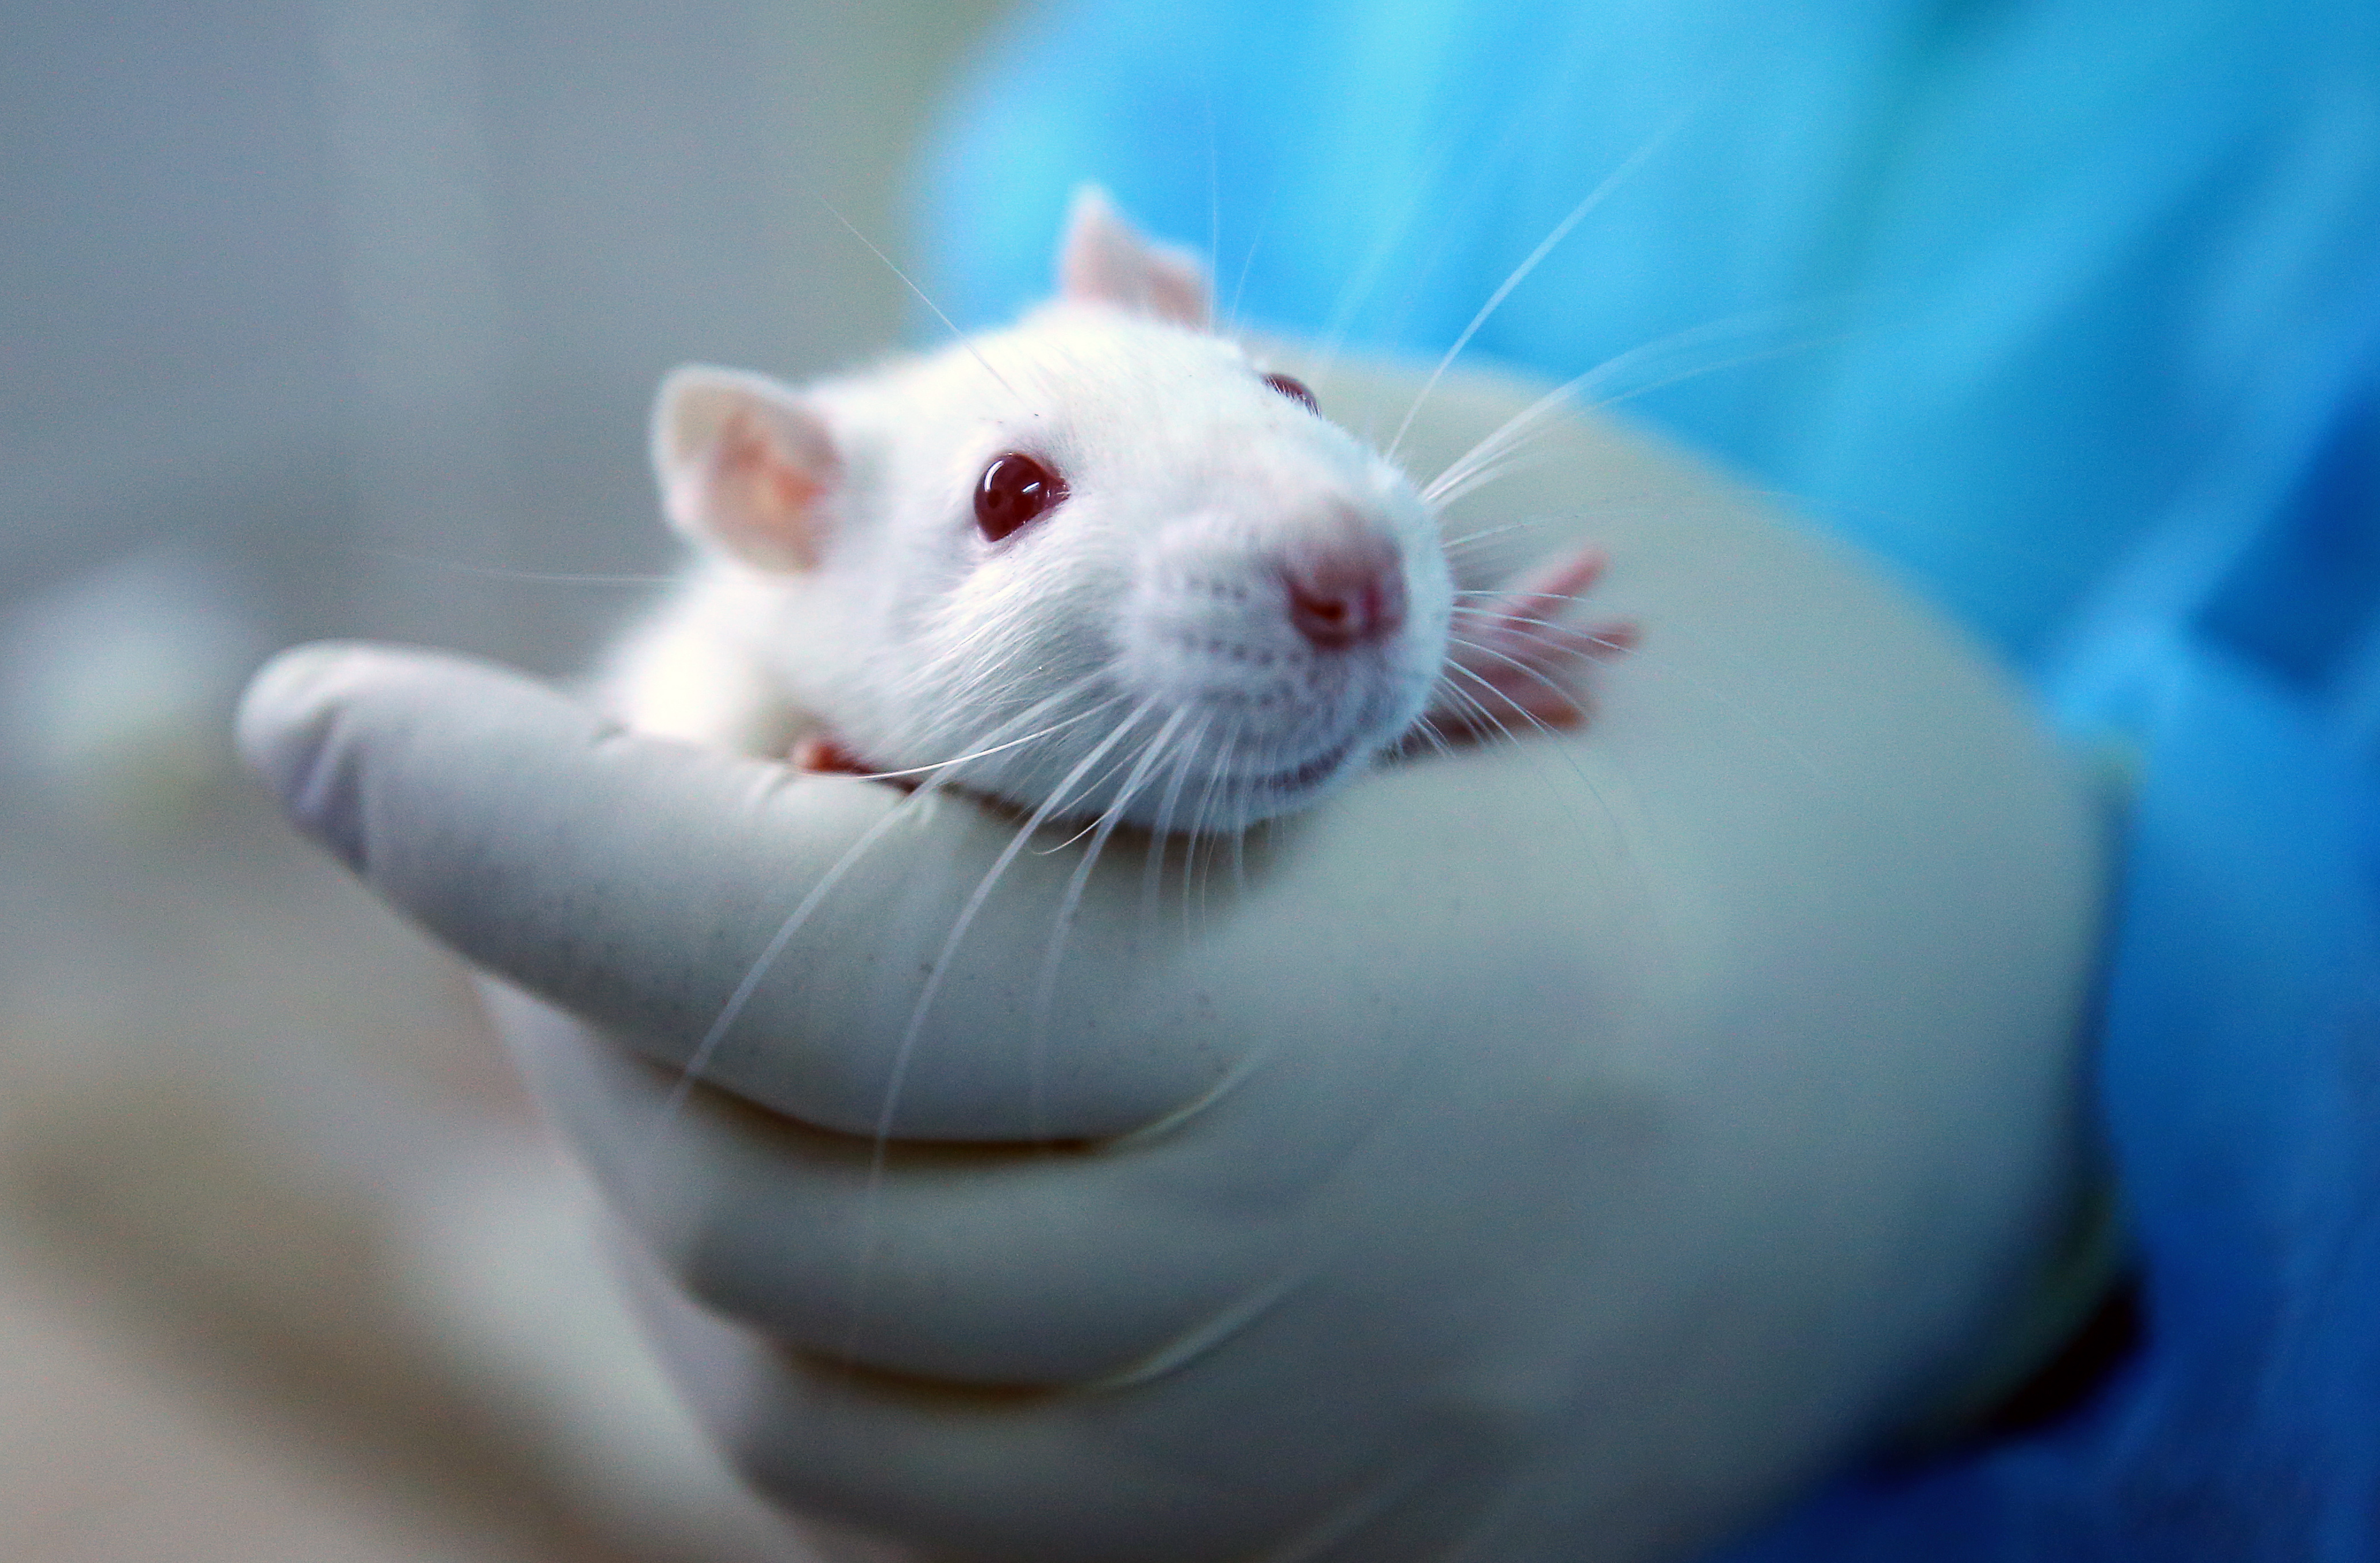 A researcher holds a laboratory rodent on March 30, 2018. (Peter Kovalev&mdash;TASS/Getty Images)